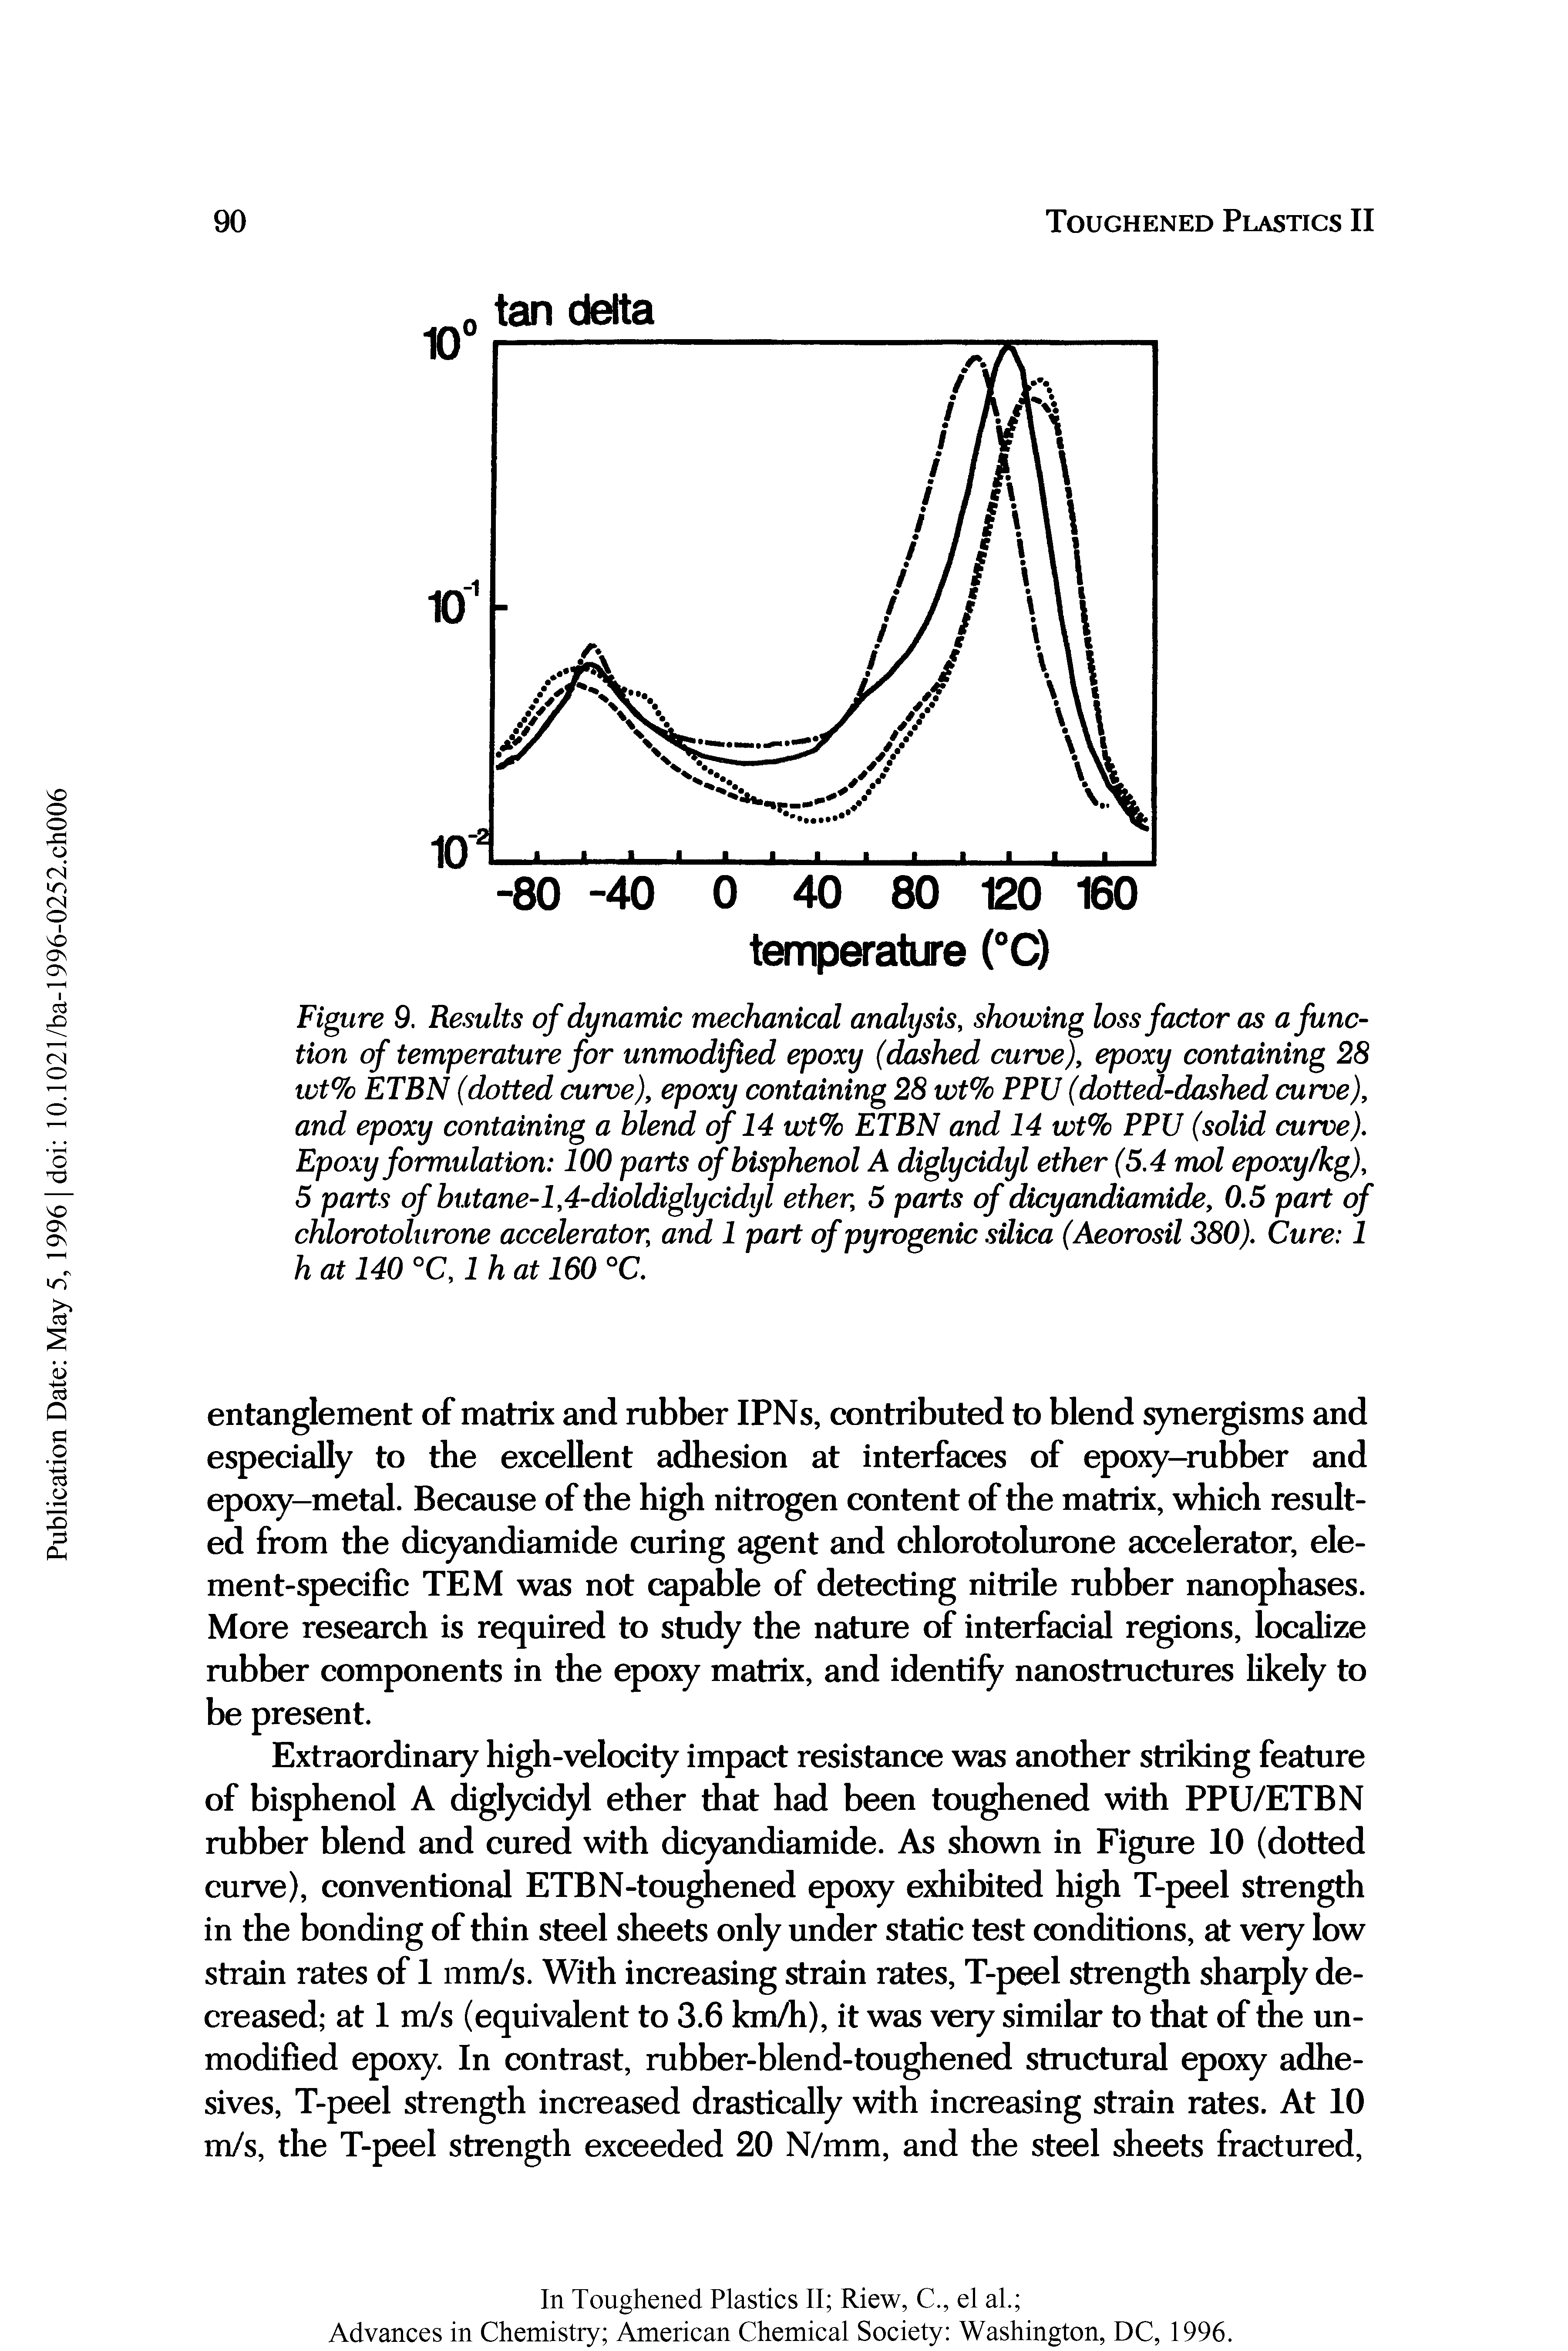 Figure 9. Results of dynamic mechanical analysis, showing loss factor as a function of temperature for unmodified epoxy (dashed curve), epoxy containing 28 wt% ETBN (dotted curve), epoxy containing 28 wt% PPU (dotted-dashed curve), and epoxy containing a blend of 14 wt% ETBN and 14 wt% PPU (solid curve). Epoxy formulation 100 parts ofbisphenol A diglycidyl ether (5.4 mol epoxy/kg), 5 parts of butane-1,4-dioldiglycidyl ether, 5 parts of dicyandiamide, 0.5 part of chlorotolurone accelerator, and 1 part of pyrogenic silica (Aeorosil 380). Cure 1 h at 140 °C, 1 h at 160 °C.